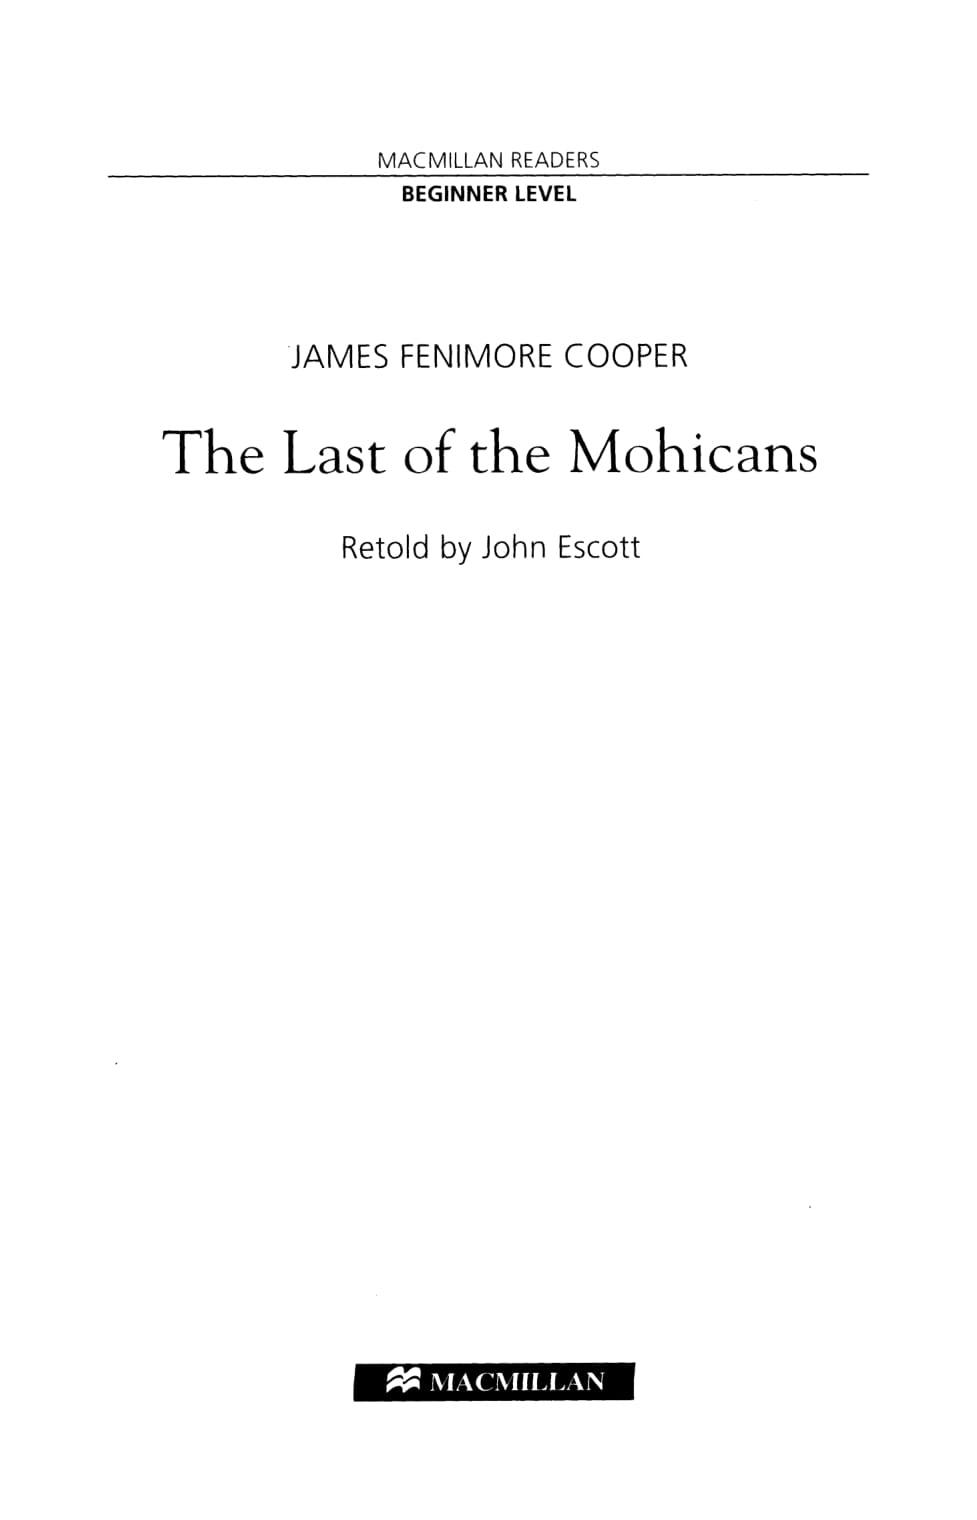 MR Last of Mohicans Beginner ( no CD )